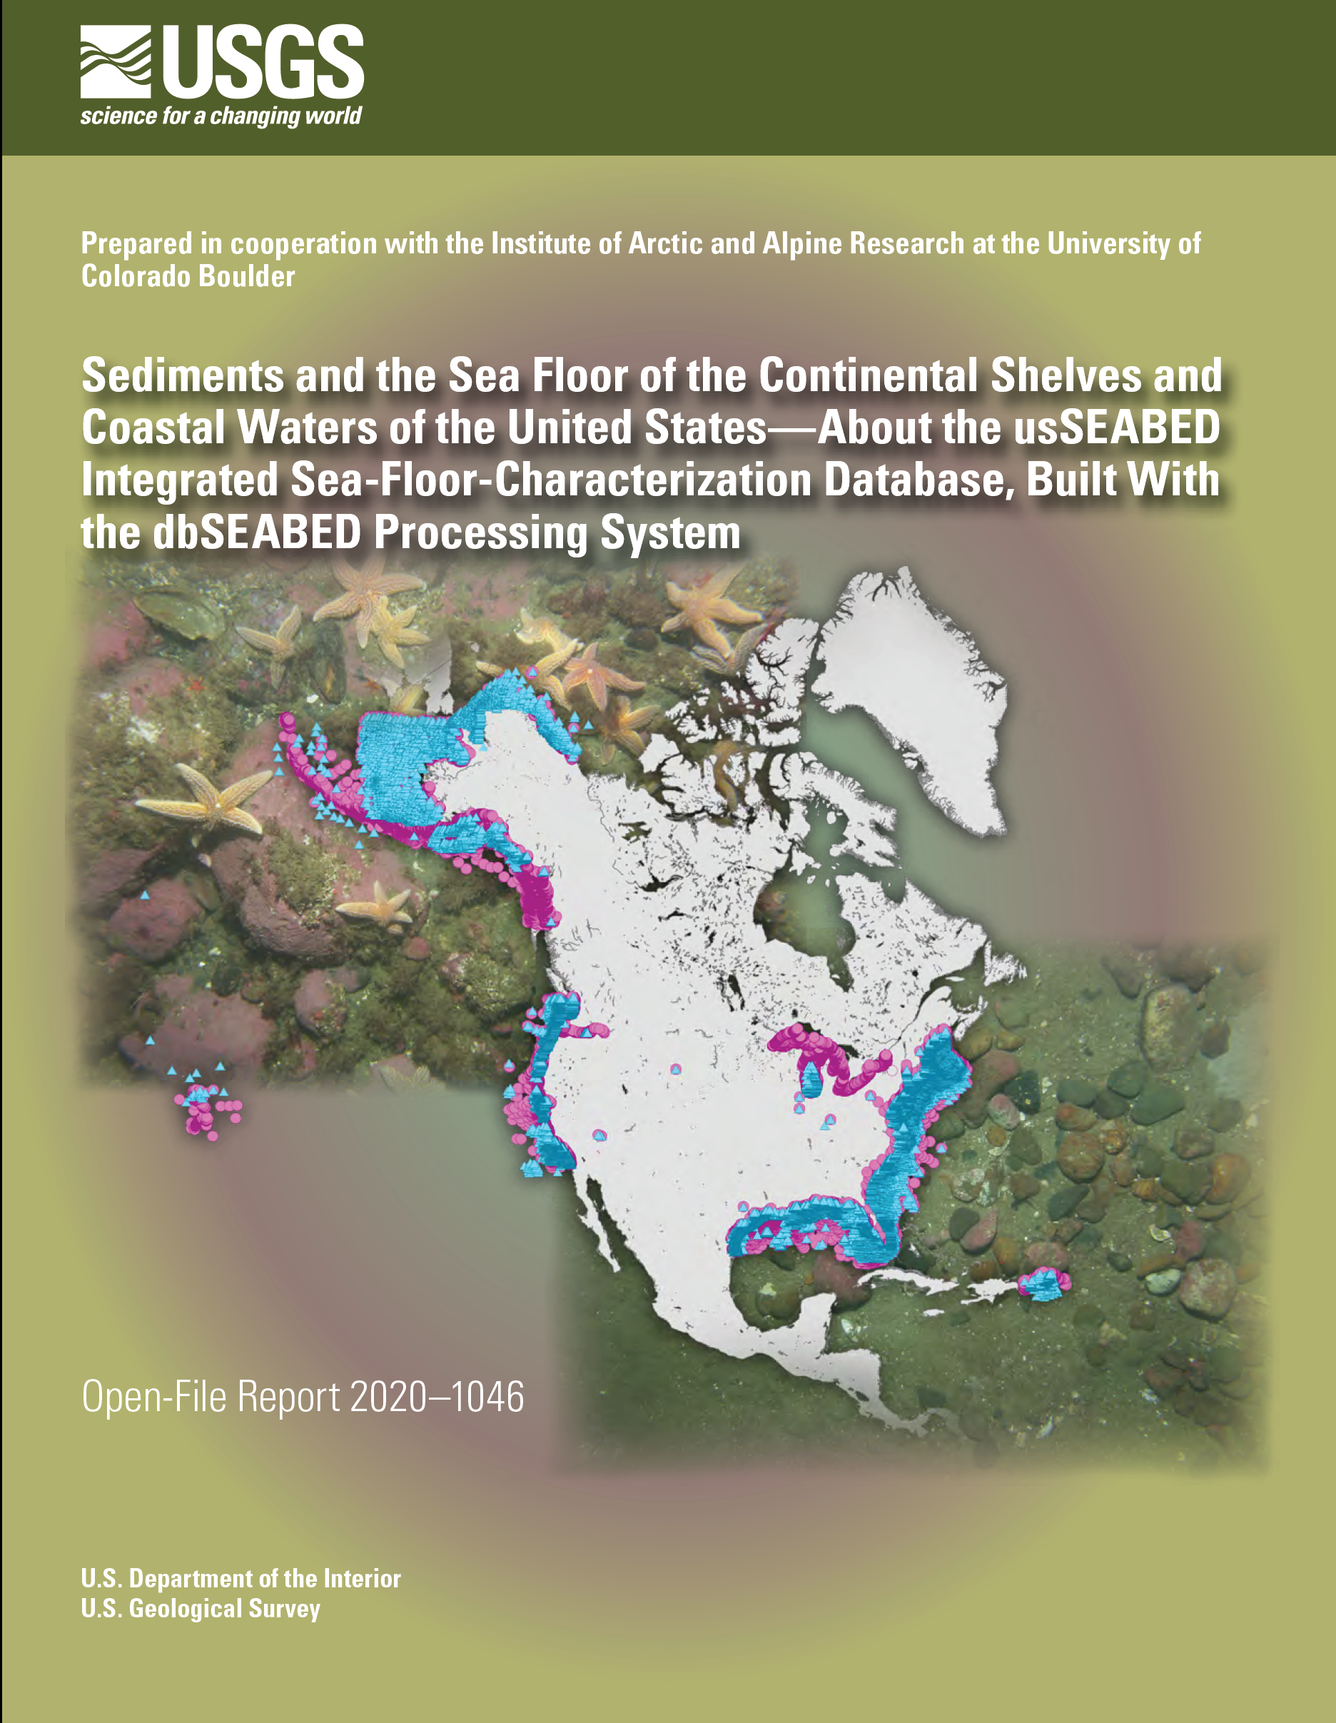 Cover image for USGS series report showing map and seafloor photographs